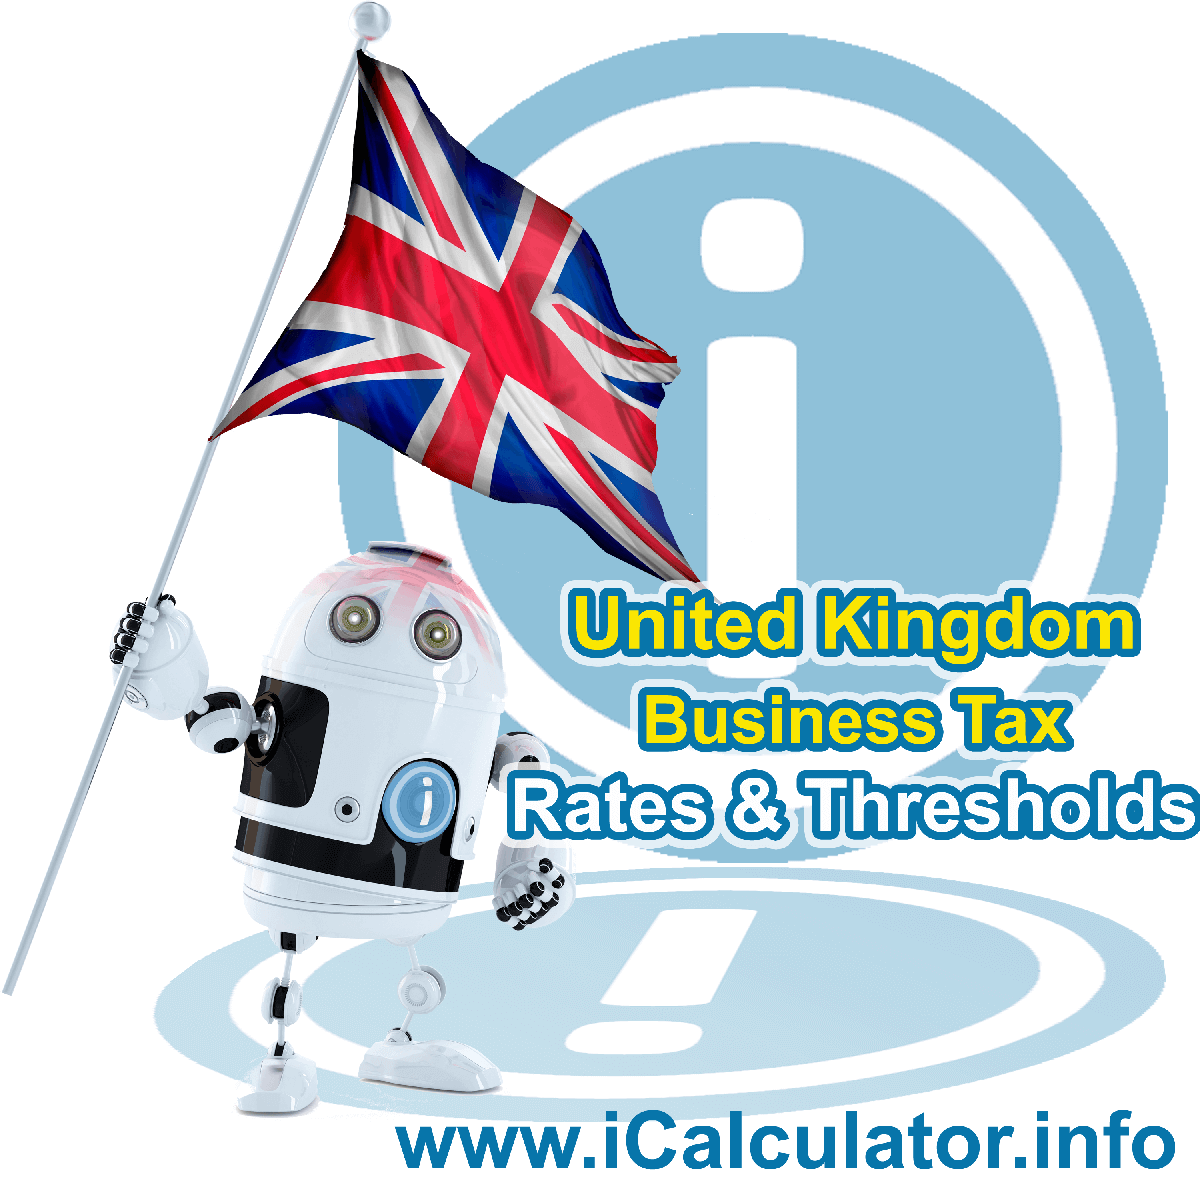 United Kingdom Corporation Tax Rates in 2013. This image shows the United Kingdom flag and information relating to the corporation tax formula for the United Kingdom Corporation Tax Calculator in 2013